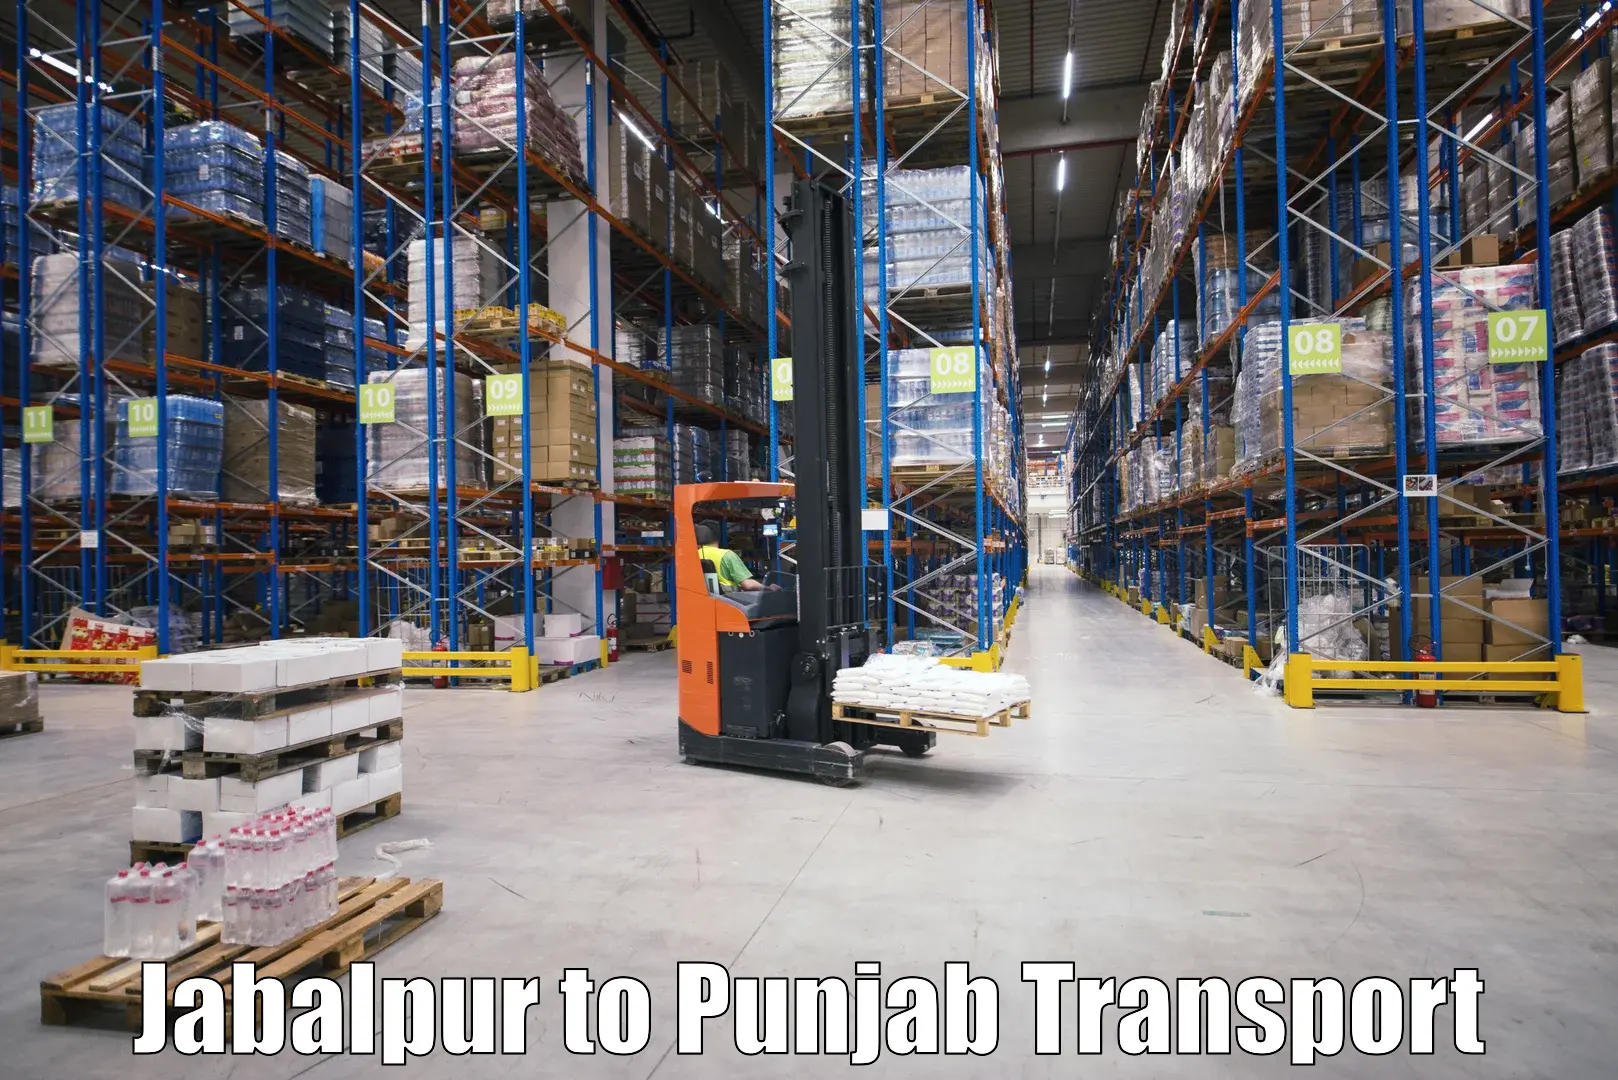 Transport bike from one state to another Jabalpur to Bathinda